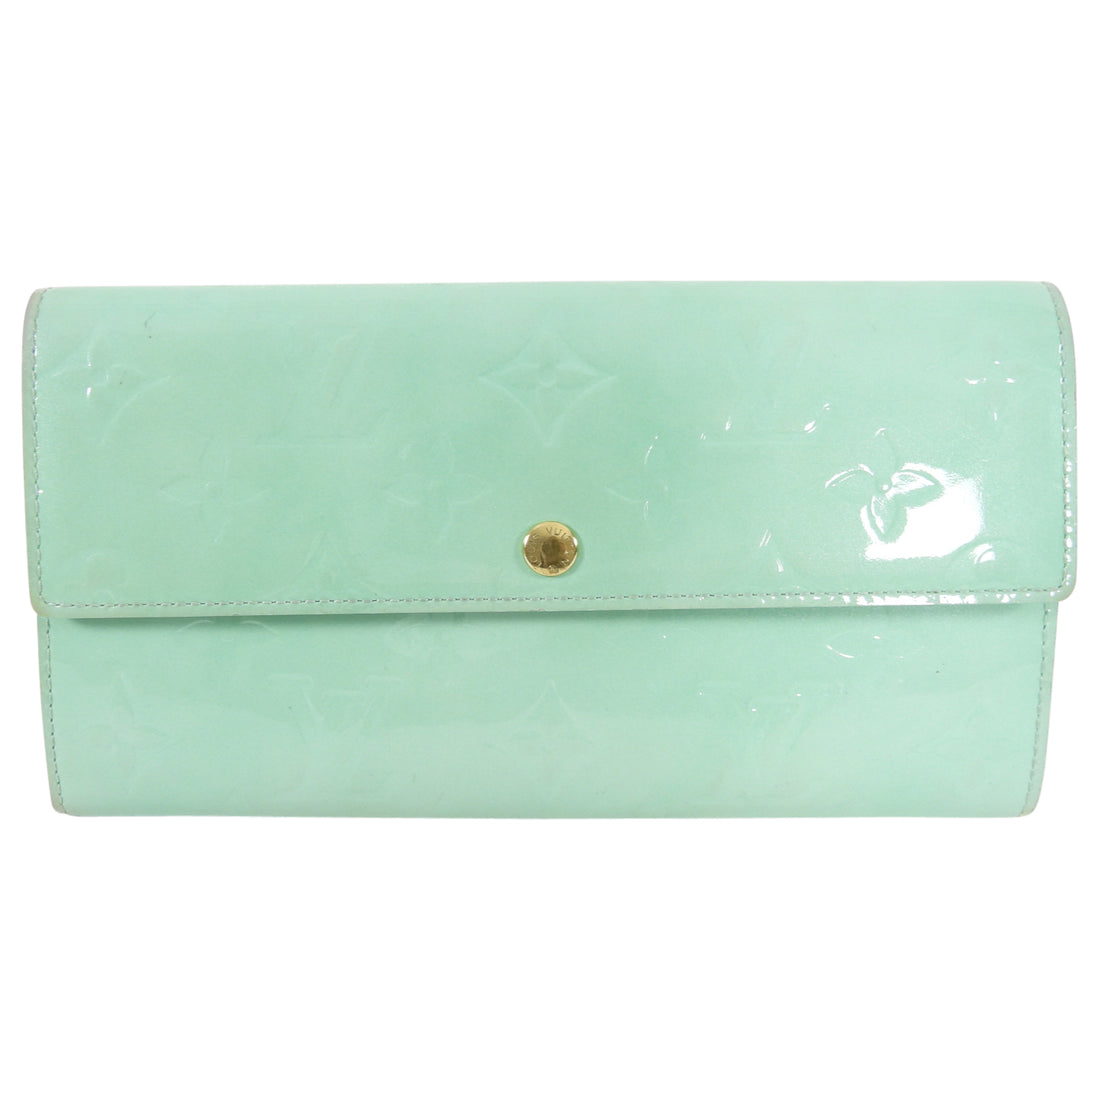 I MISS YOU VINTAGE INC. on Instagram: Louis Vuitton mint green vernis  Sarah wallet $375 at imissyouvintage.com #louisvuitton . . purchase online  with free ship in Canada for orders $400+. Find additional